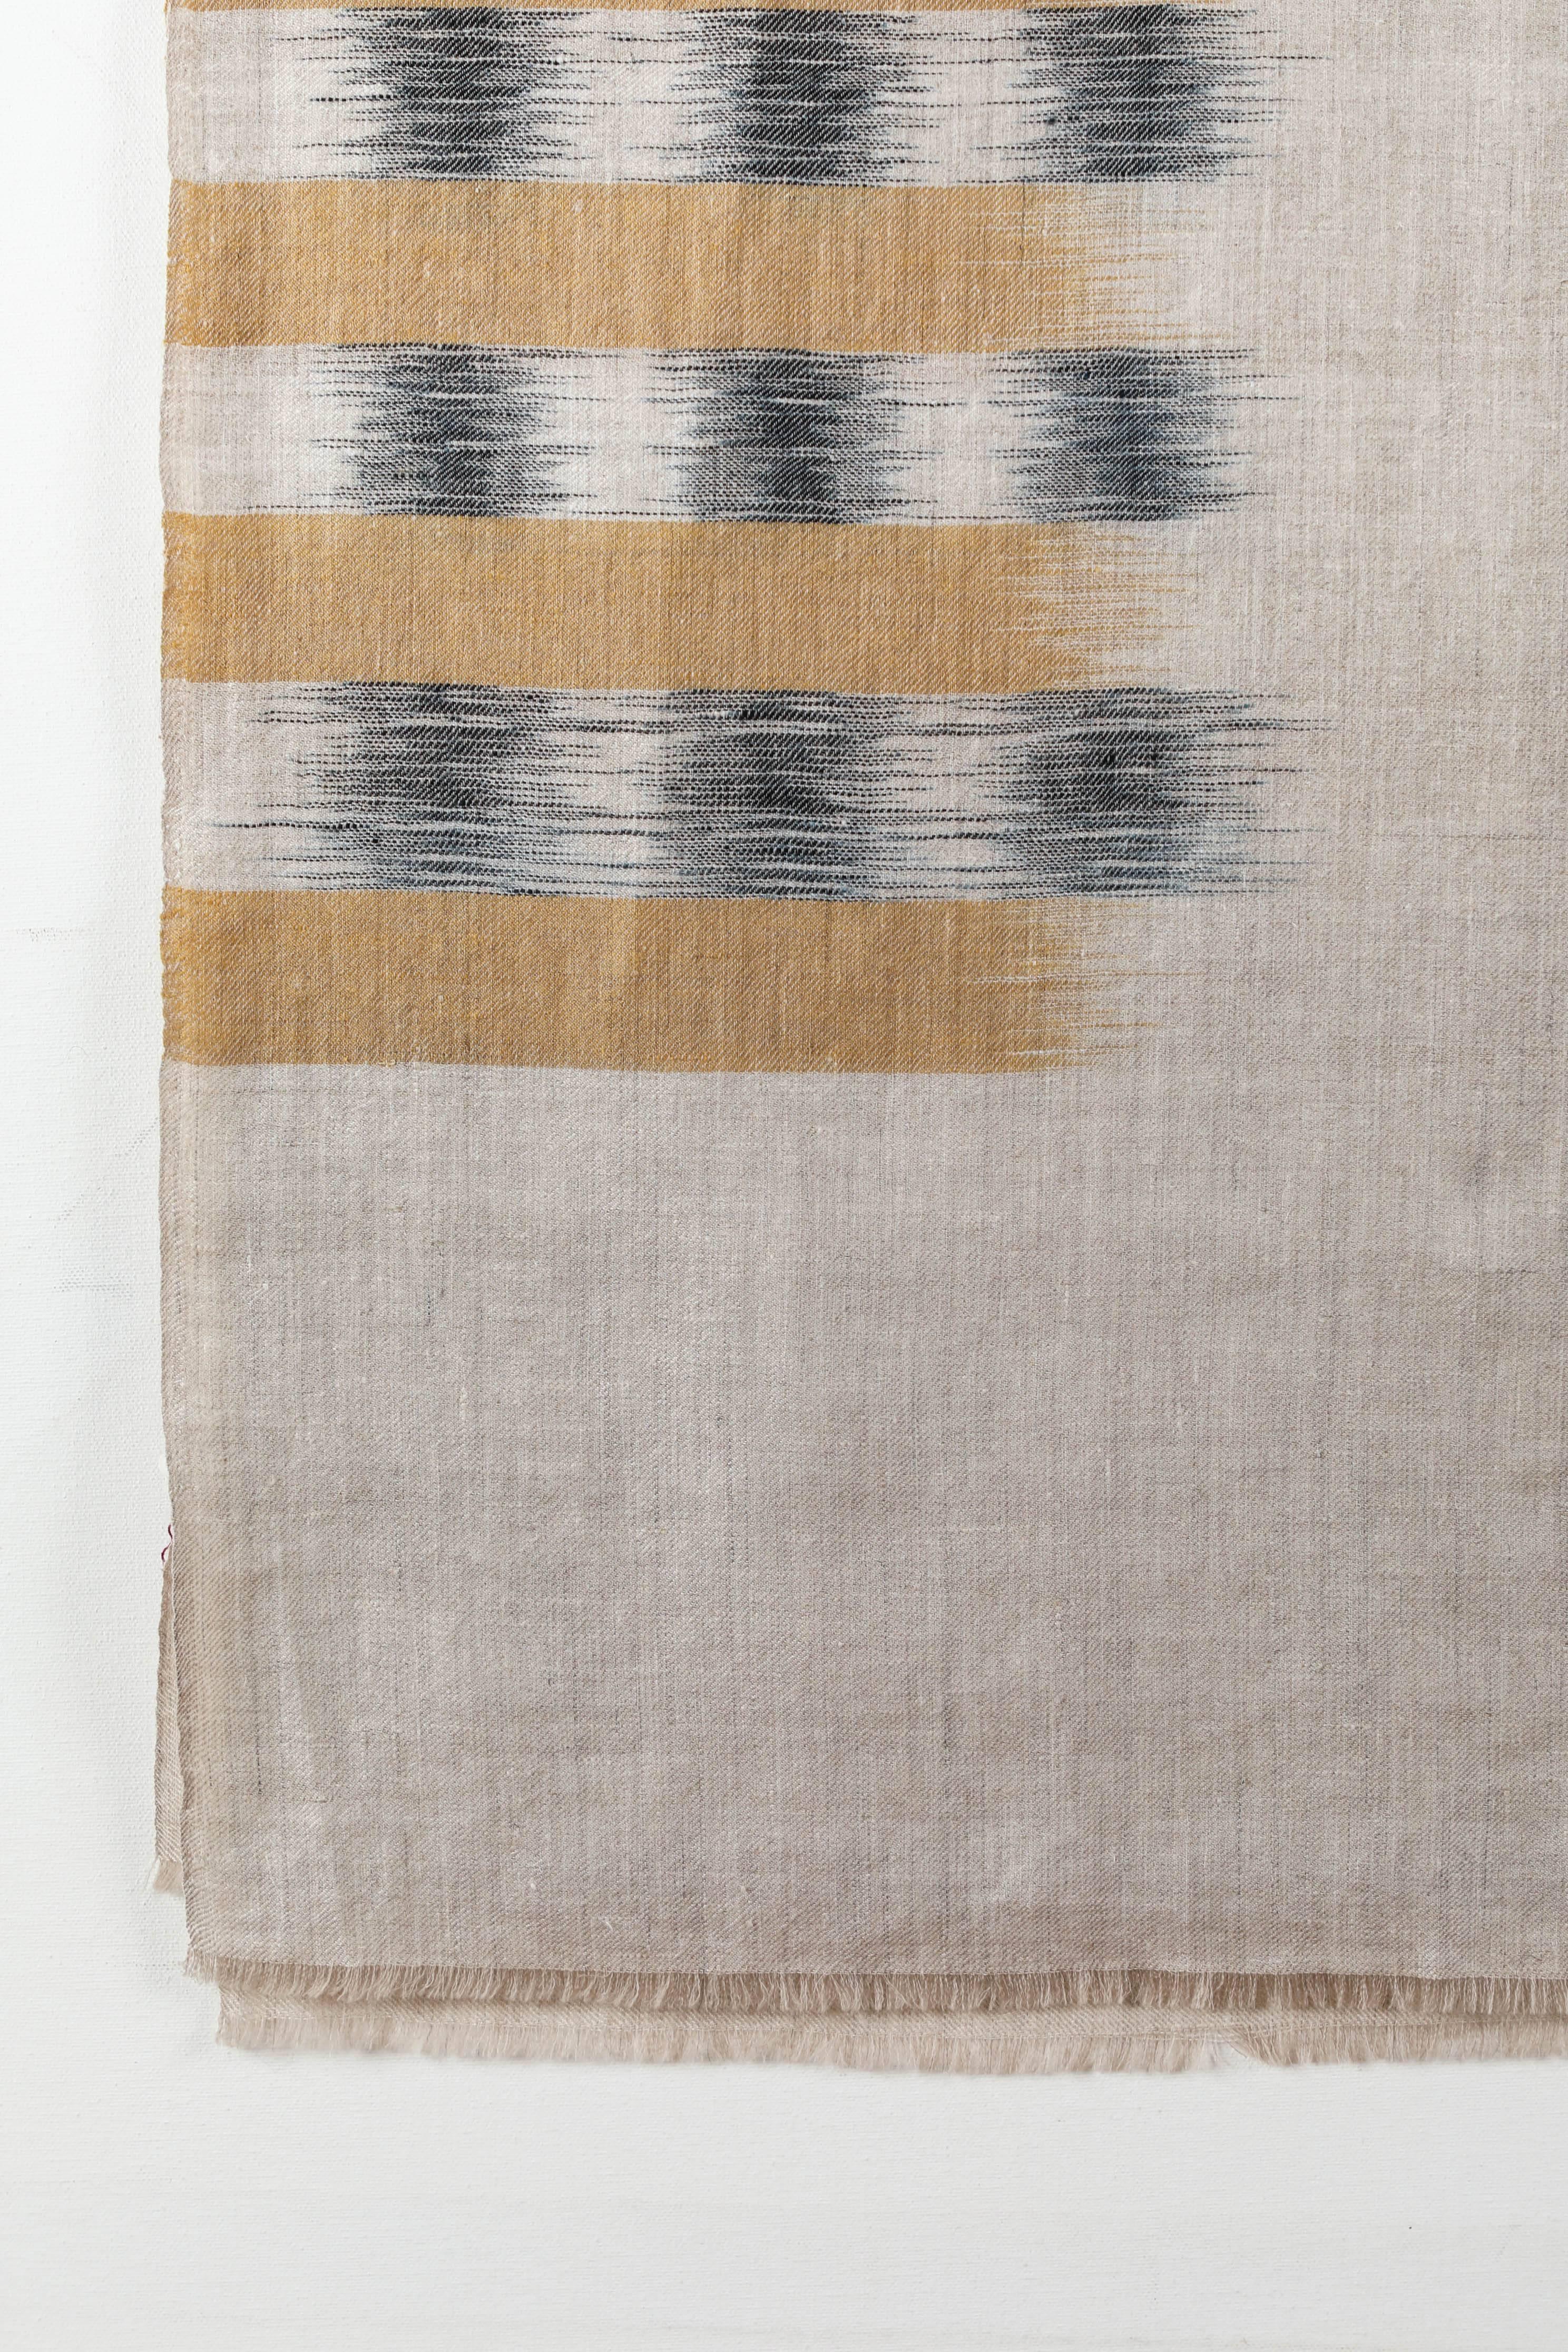 Indian Ikat Woven Cashmere Throw